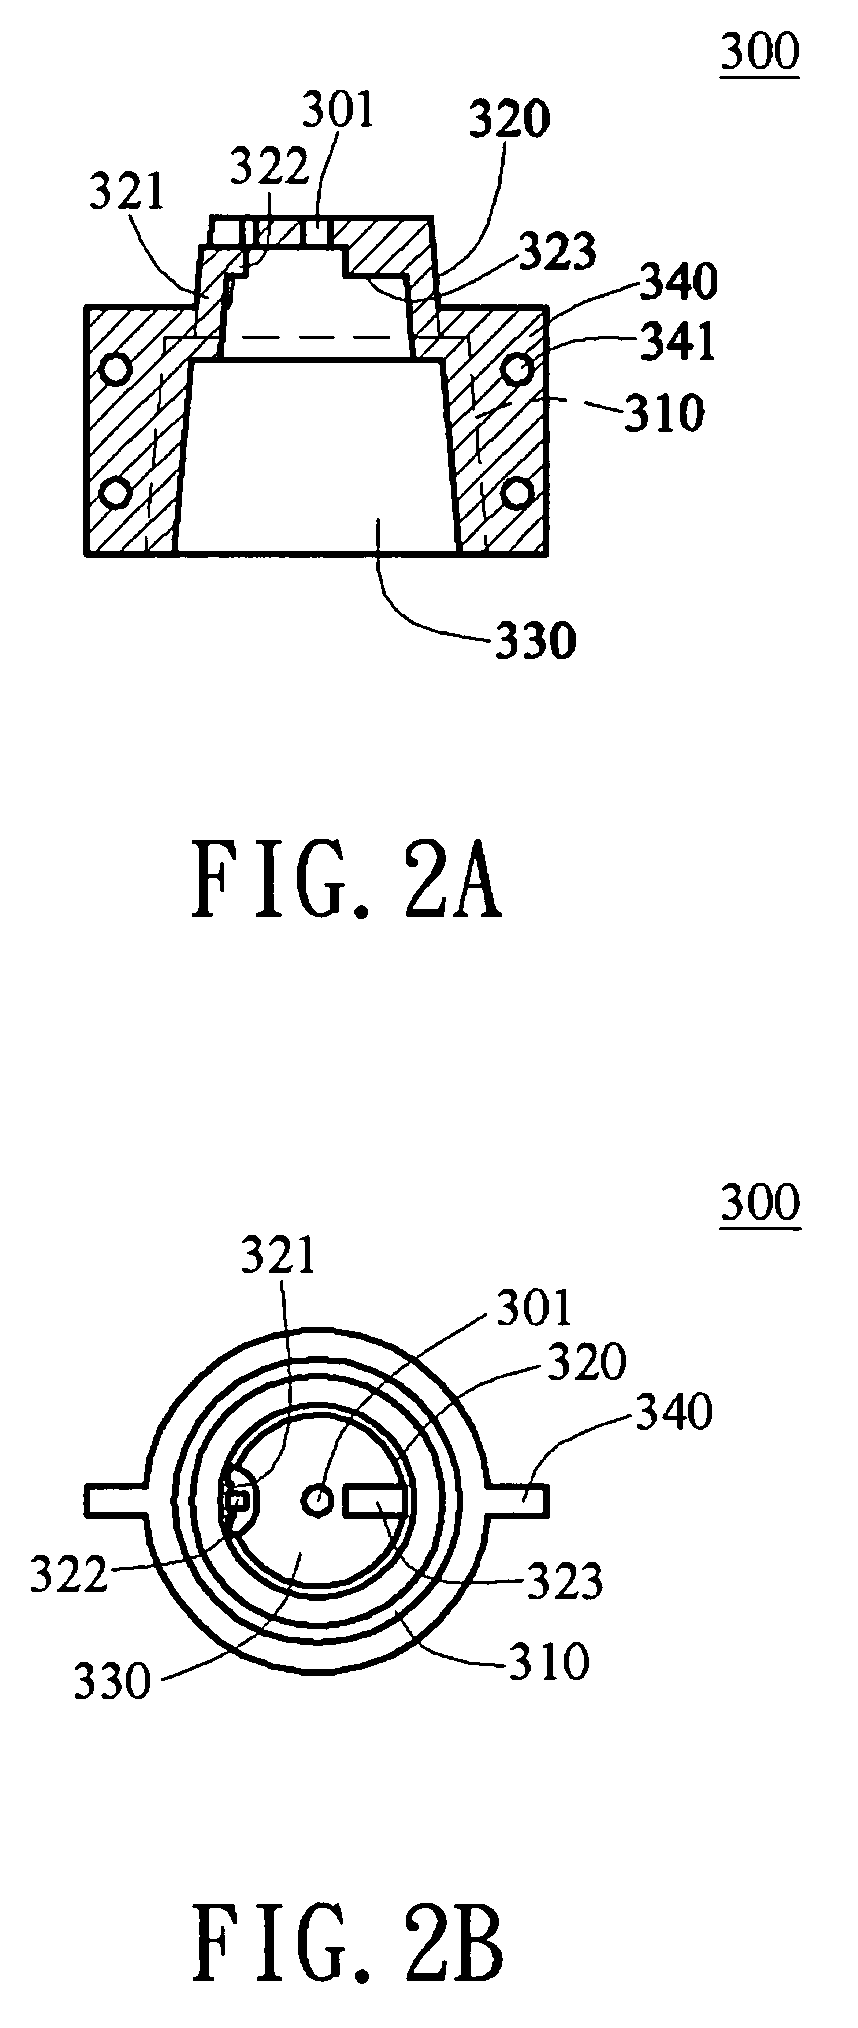 Thin display structure